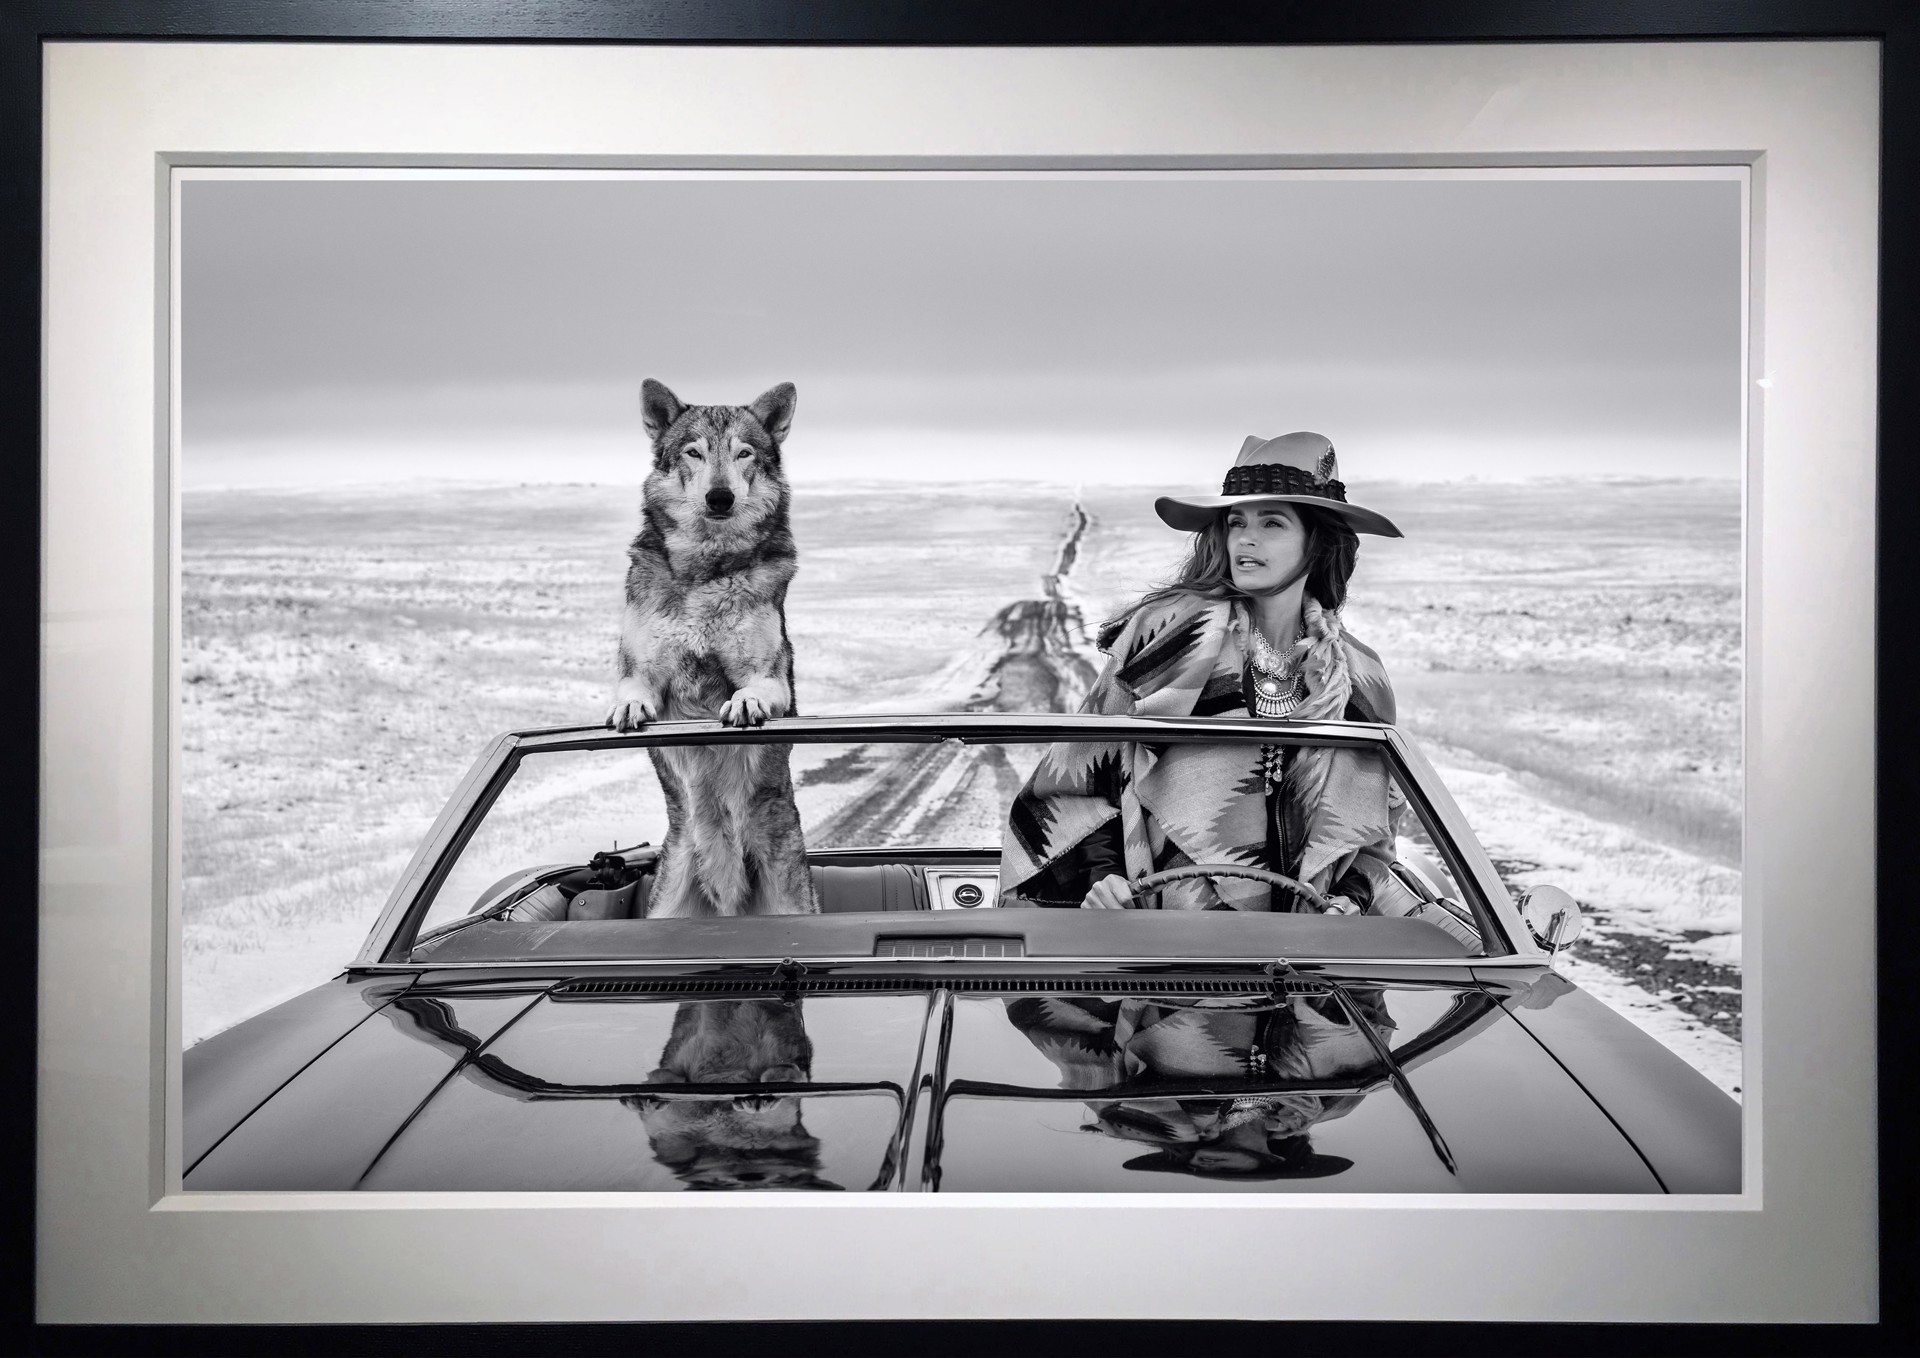 On the Road Again (19/20) by David Yarrow